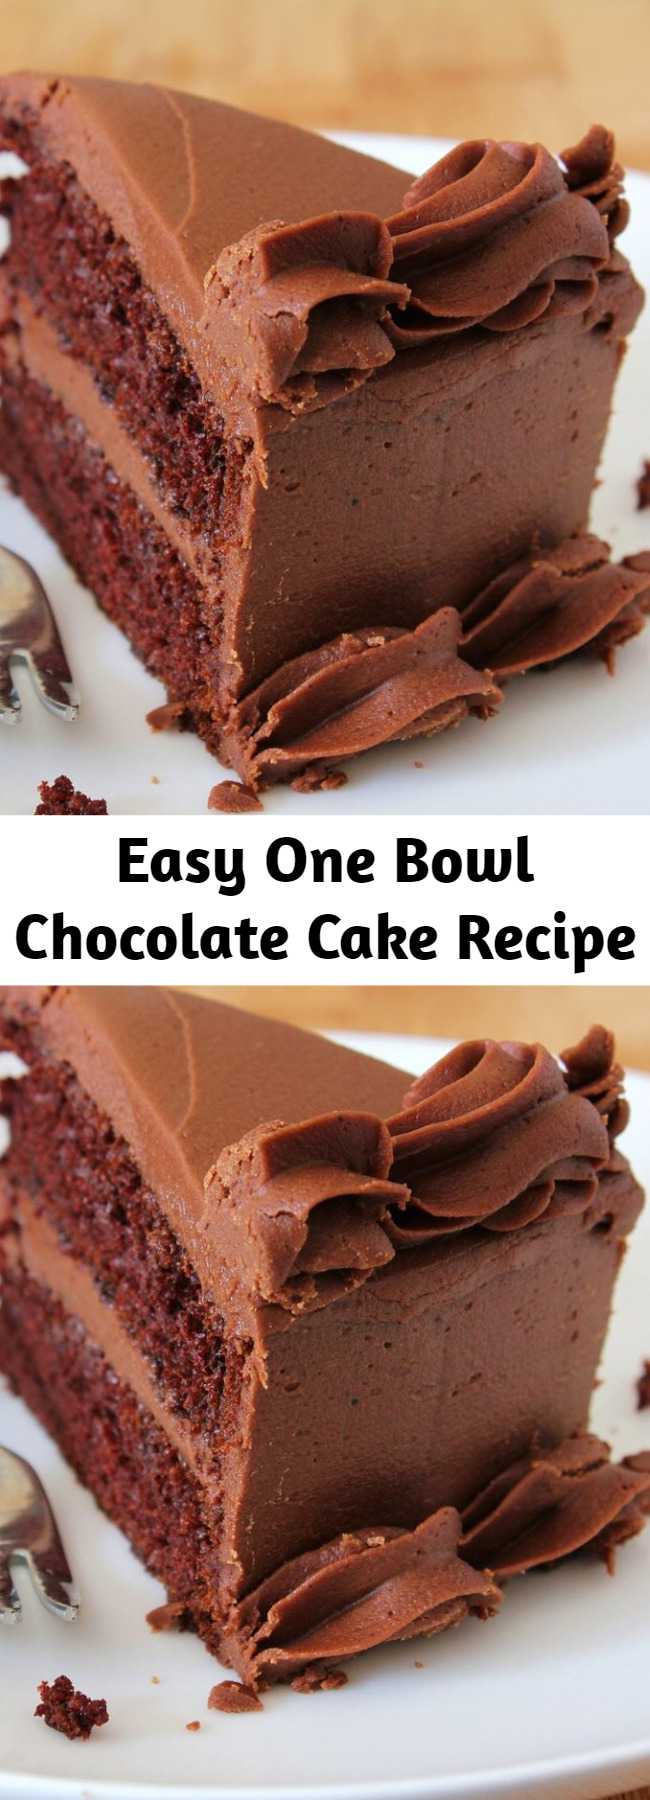 Easy One Bowl Chocolate Cake Recipe - This is a rich and moist chocolate cake. It only takes a few minutes to prepare the batter. Frost with your favorite chocolate frosting.